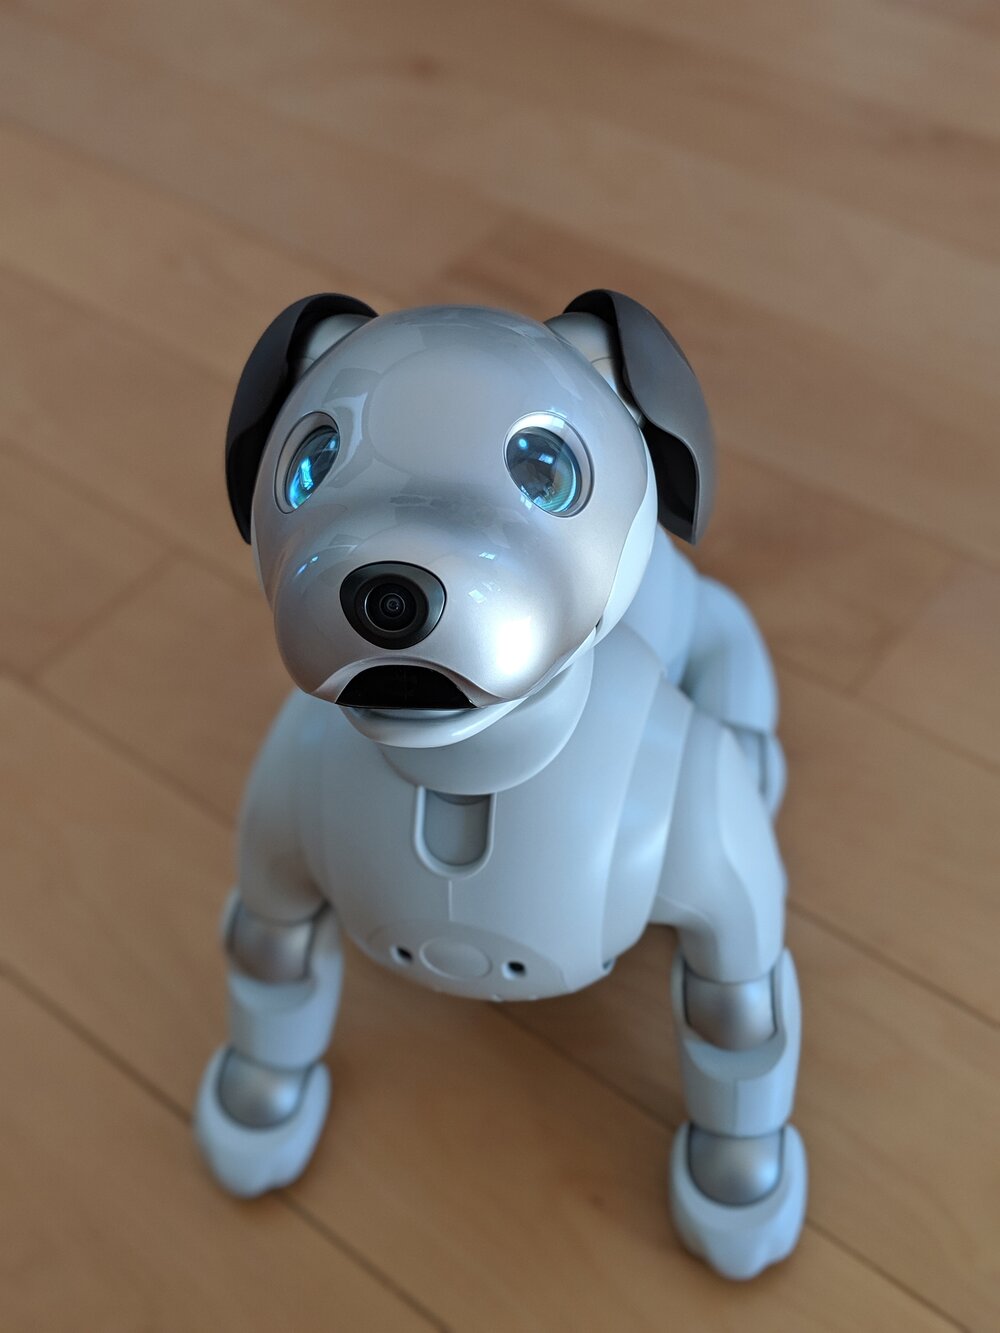 Living with the Aibo ERS-1000 Robot Dog for a year — Sensors and 